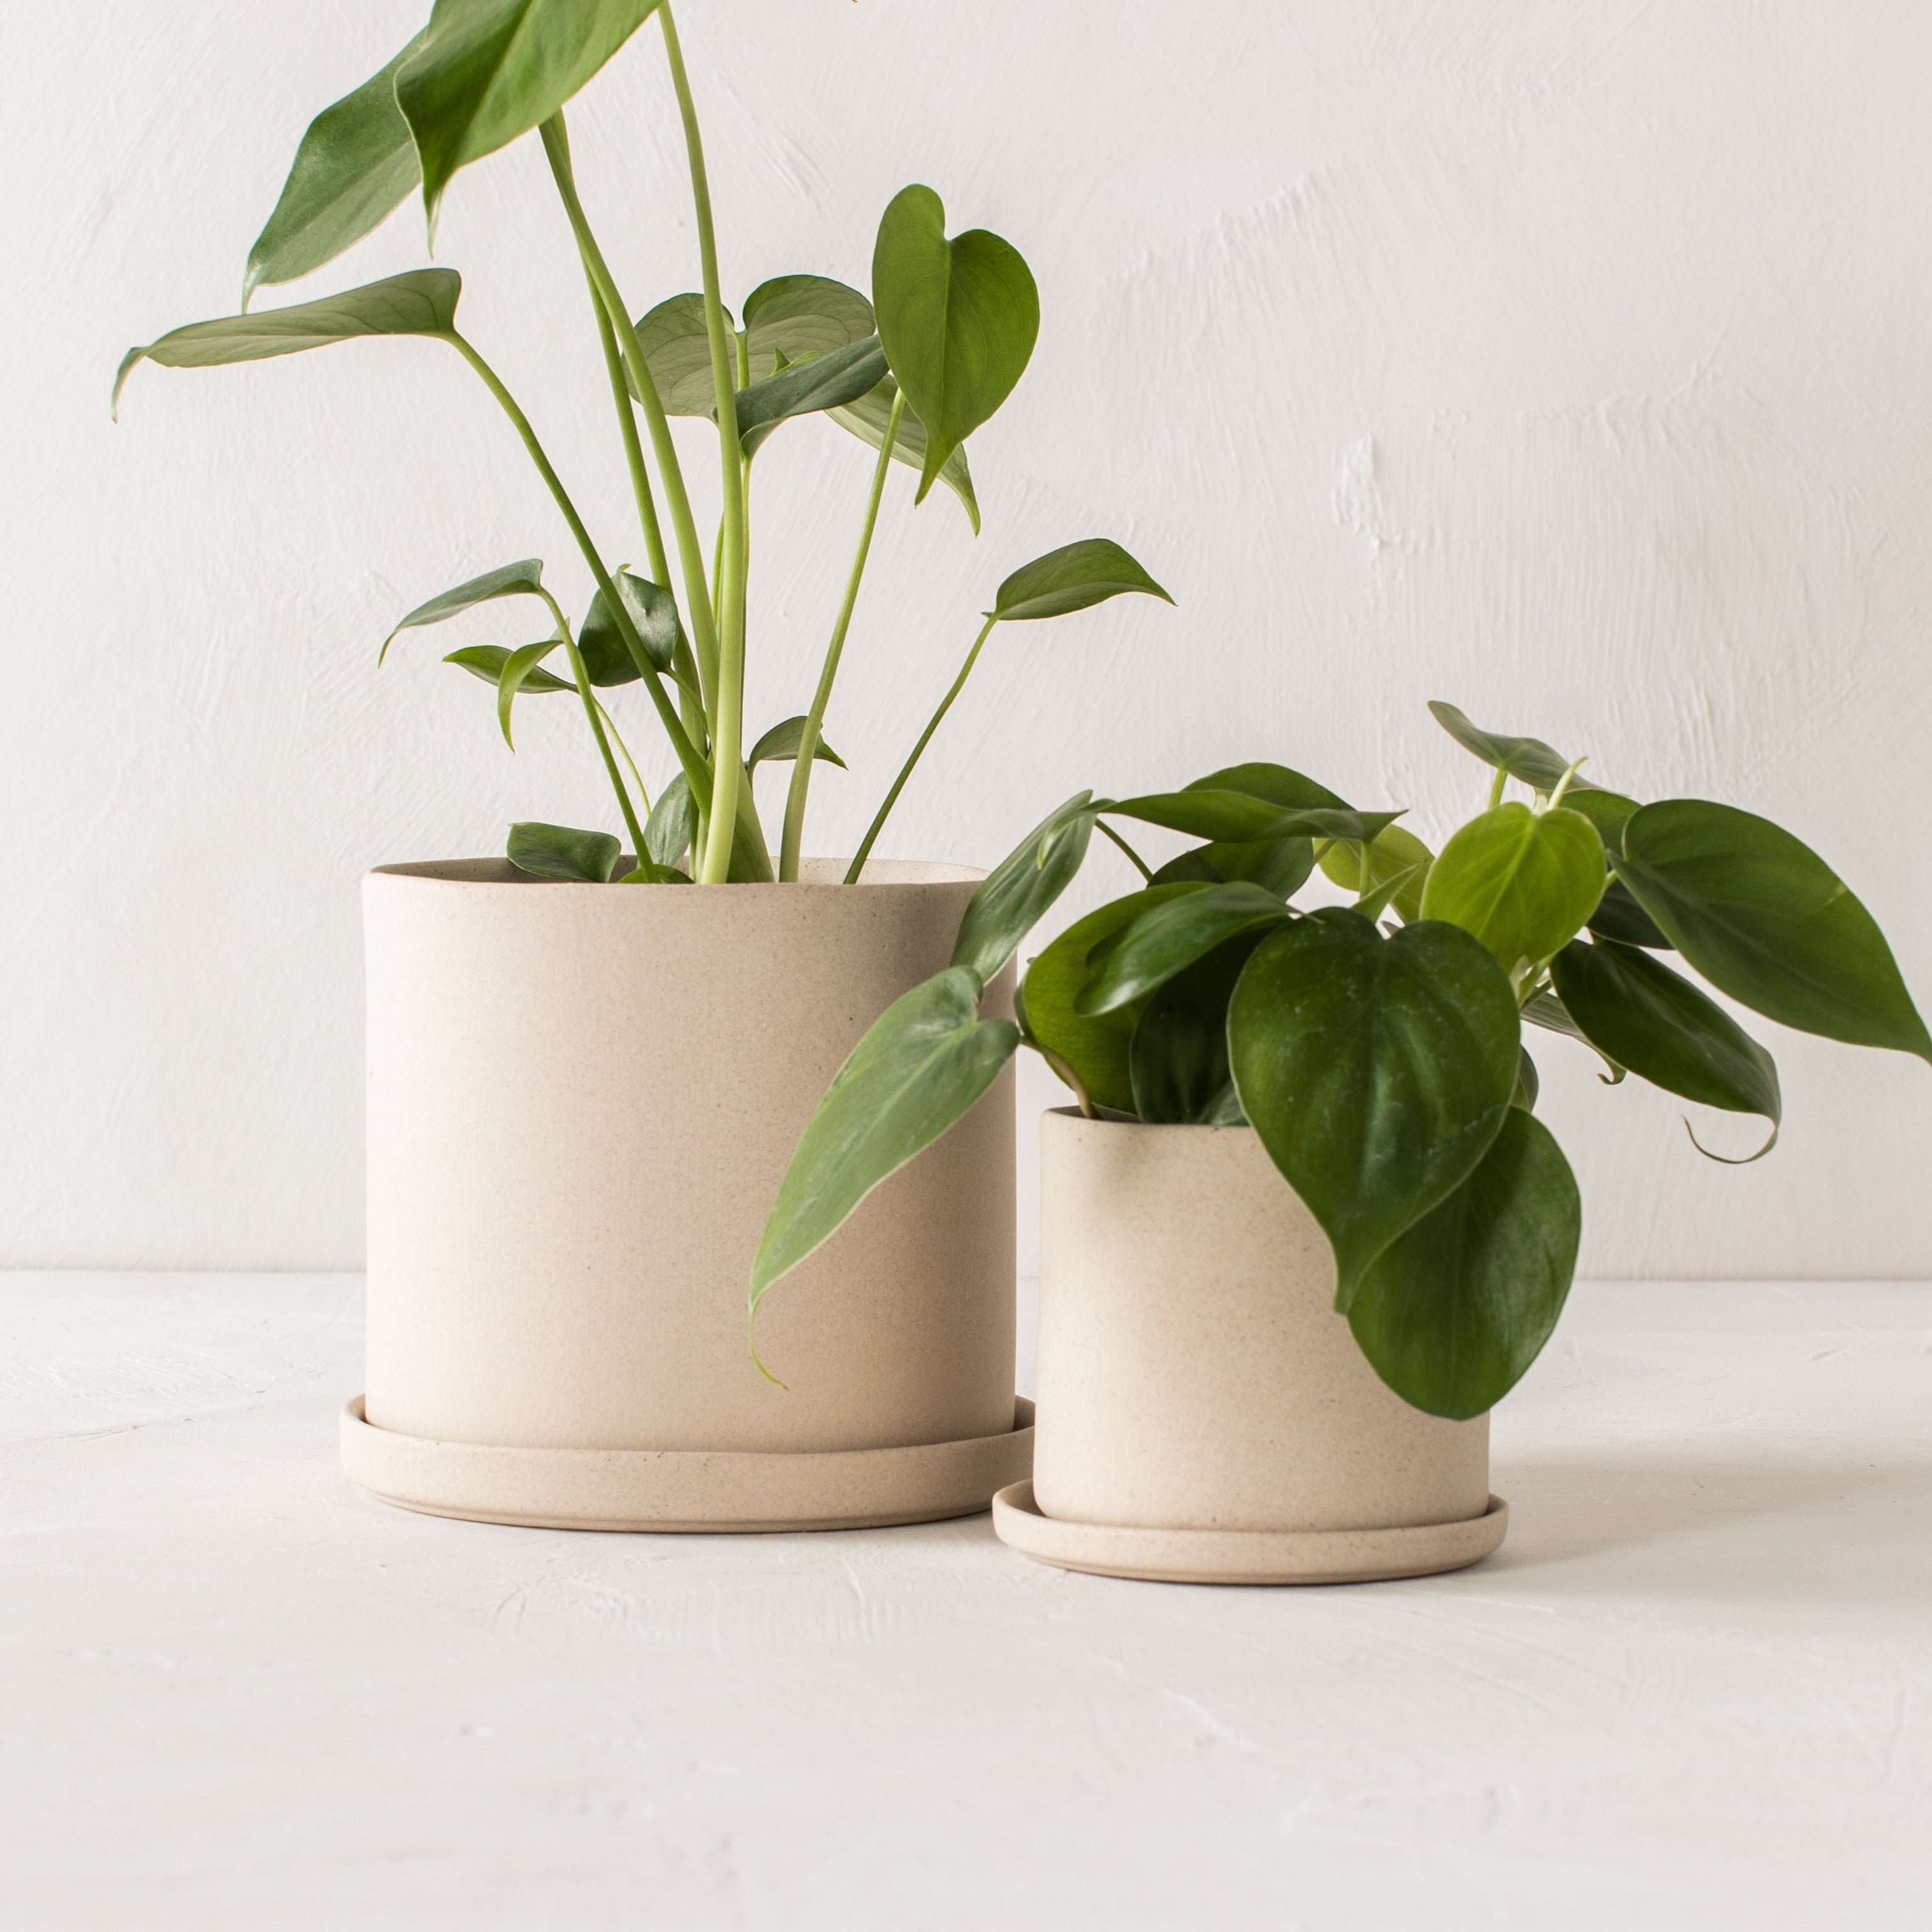 Four inch and 6 inch stoneware ceramic planter side by side. Both have drainage dishes. Six inch has a monstera plant, and the four inch has a pathos inside. Both on a plaster textured back drop and tabletop. Handmade ceramic planters designed and sold by Convivial Production. Kansas City Ceramics.